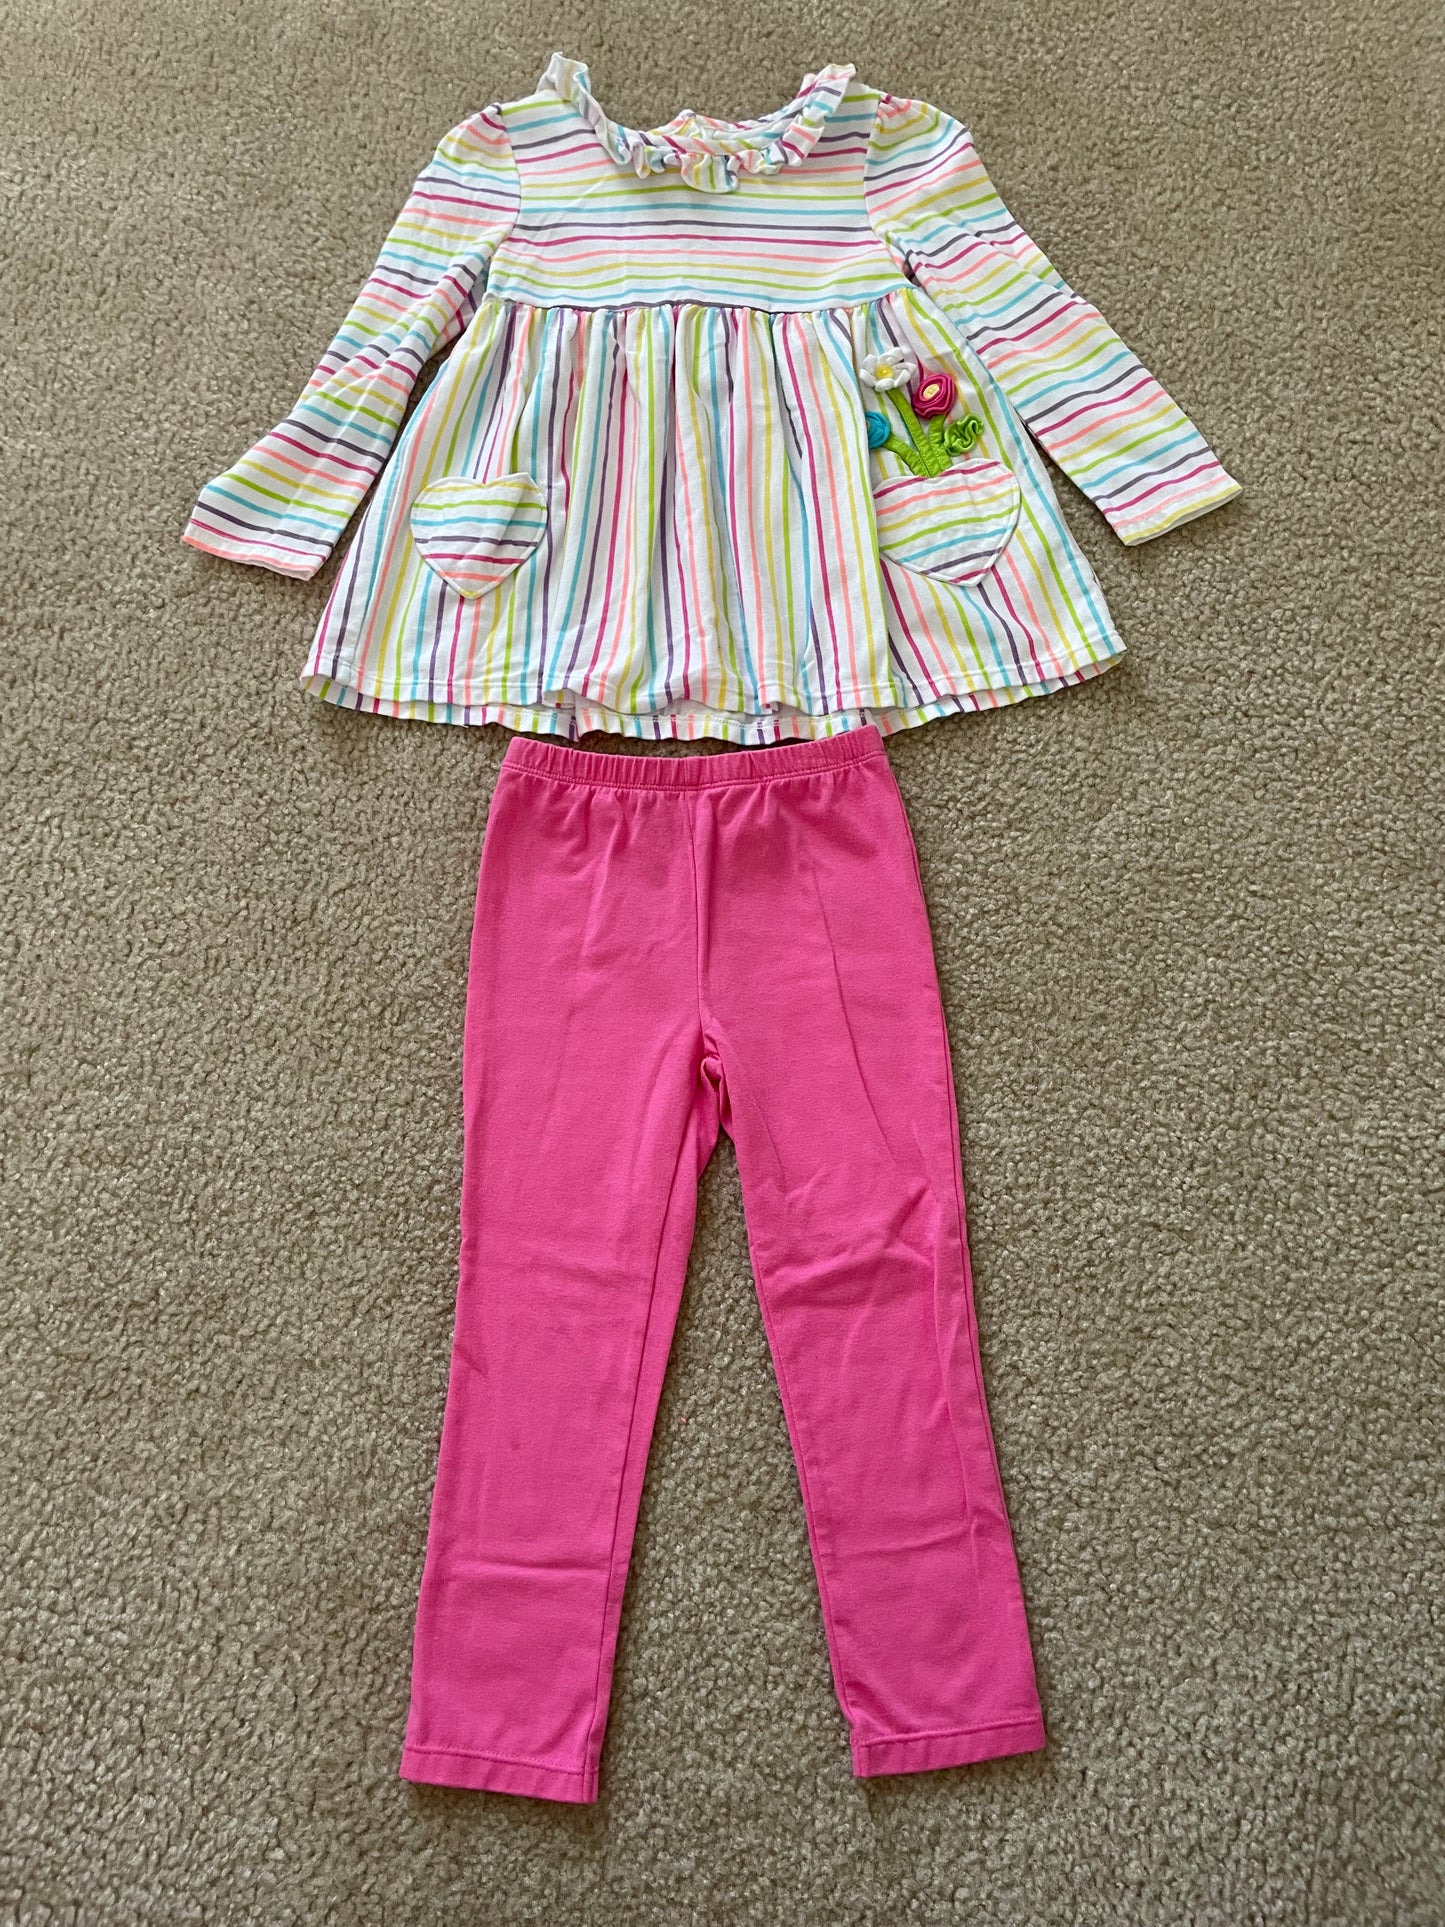 Girls 4T outfit